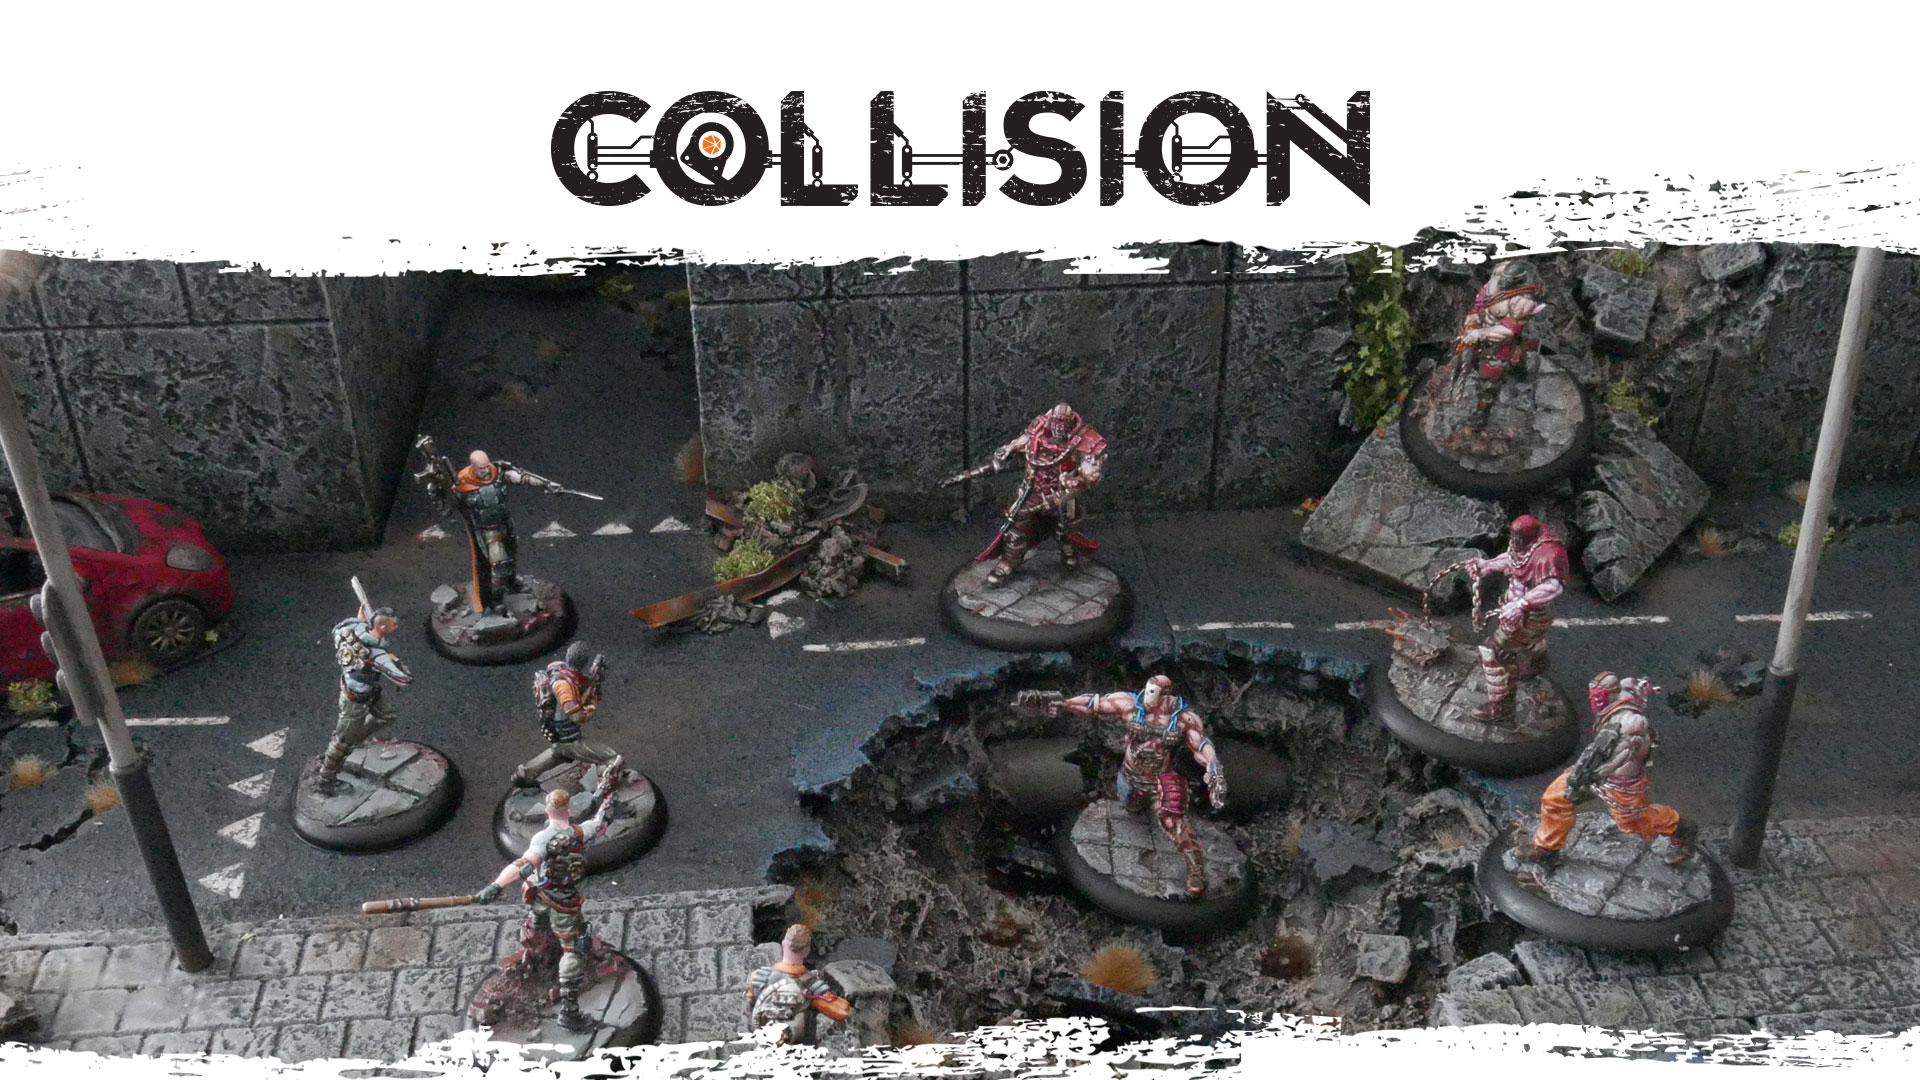 Help decide the future of Collision!